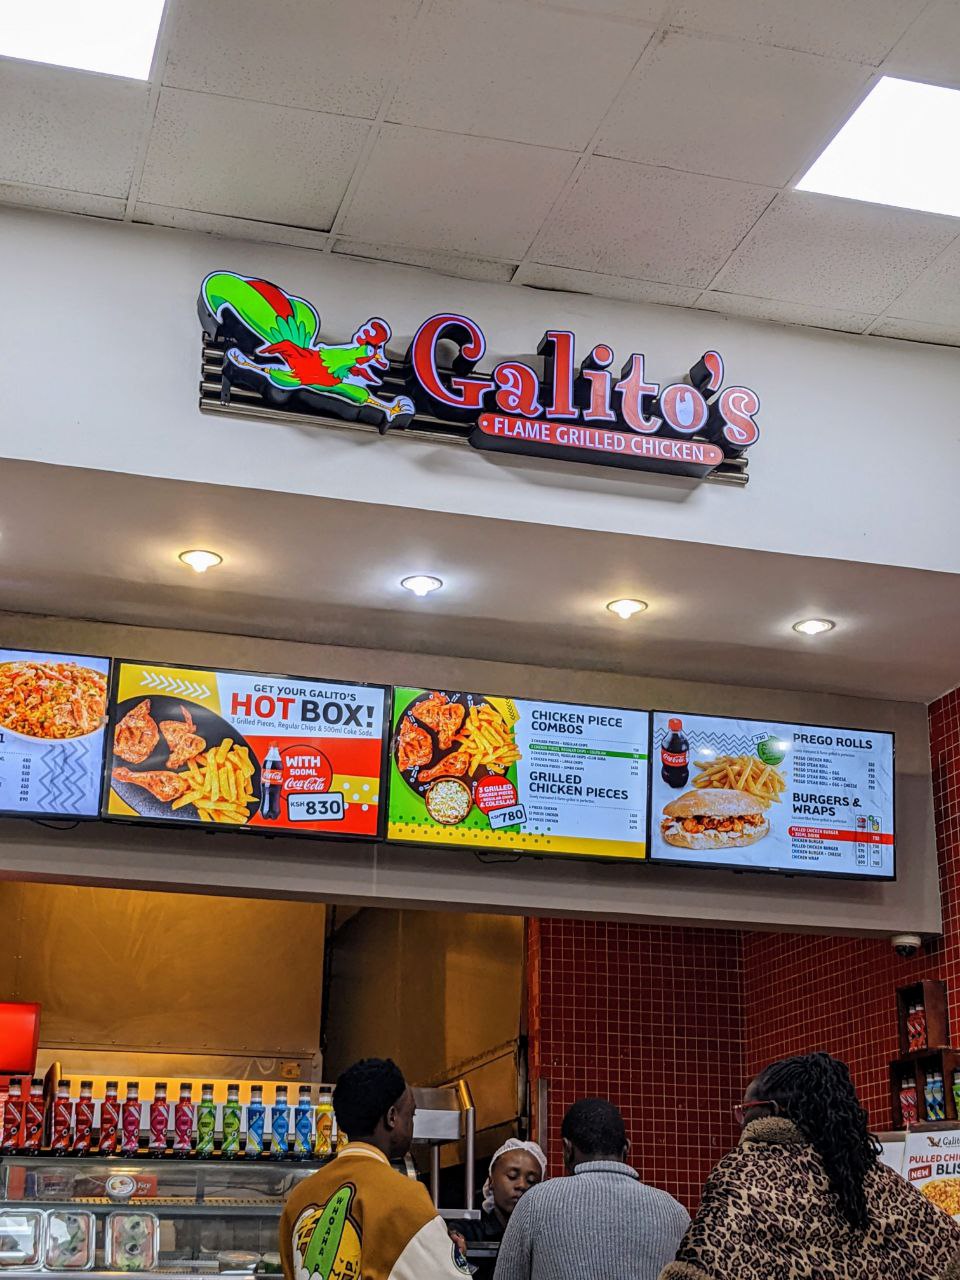 You are currently viewing Galito’s Flame Grilled Chicken: Restaurant Review & Menu